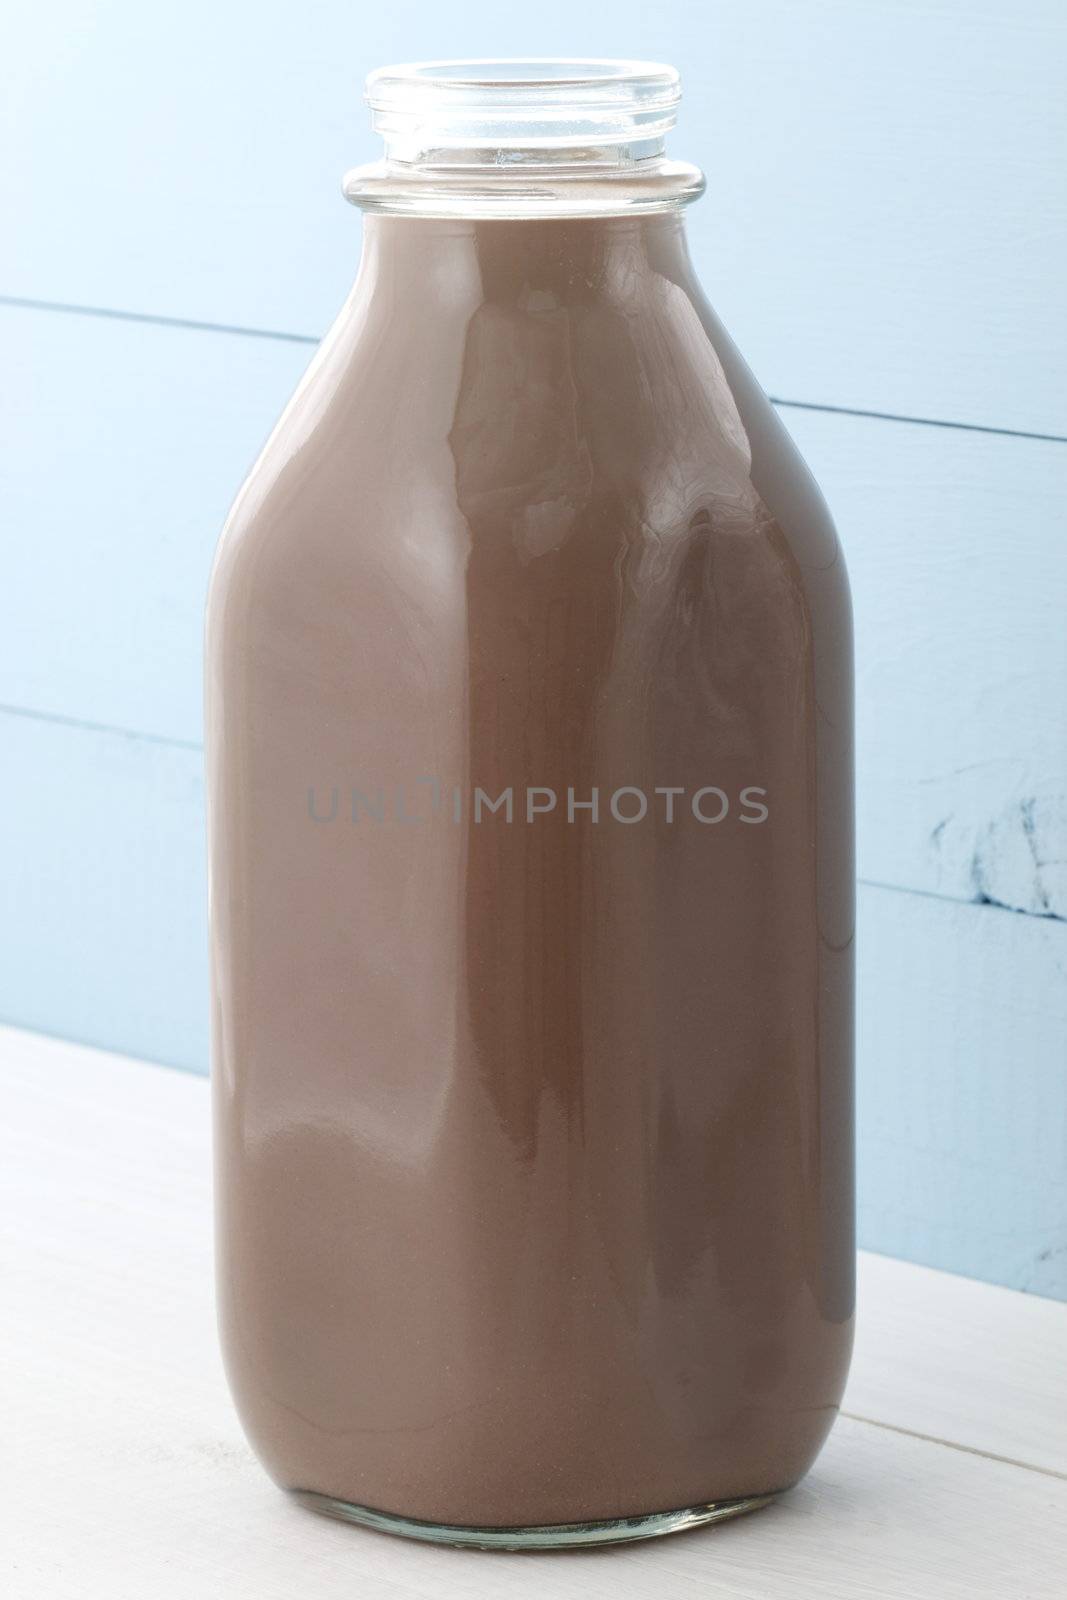 Delicious, nutritious and fresh Chocolate bottle, made with organic real cocoa mass